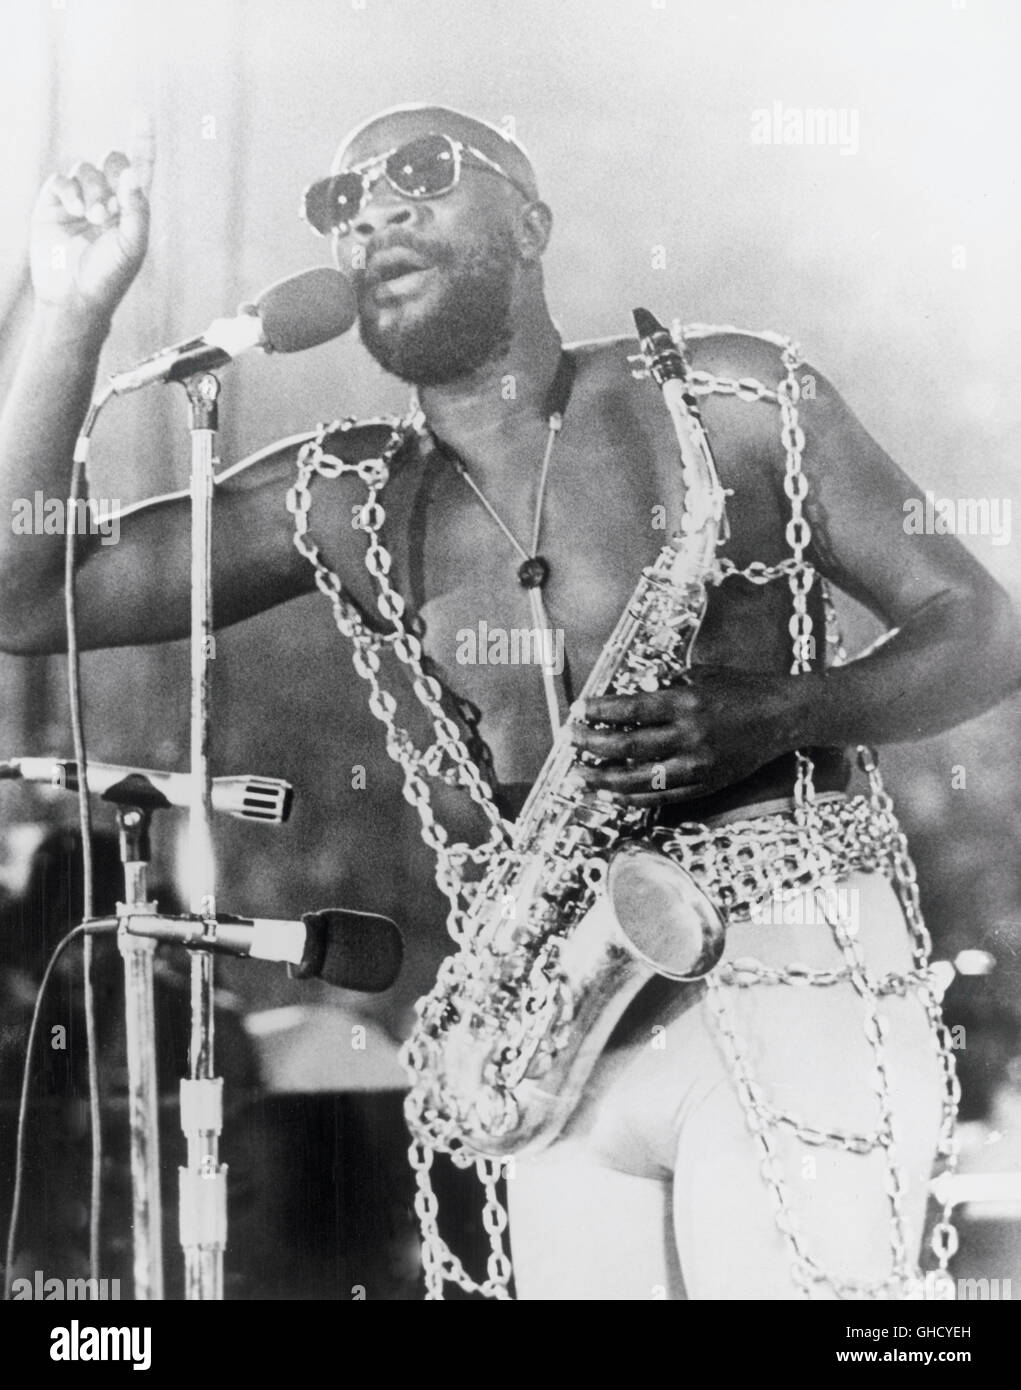 WATTSTAX USA 1973 Mel Stuart Wattstax the concert was a outpouring of music, soul and the black experience. Staged in the LA Coliseum in the summer of 1972. With: ISAAC HAYES, african-american musician Regie: Mel Stuart Stock Photo